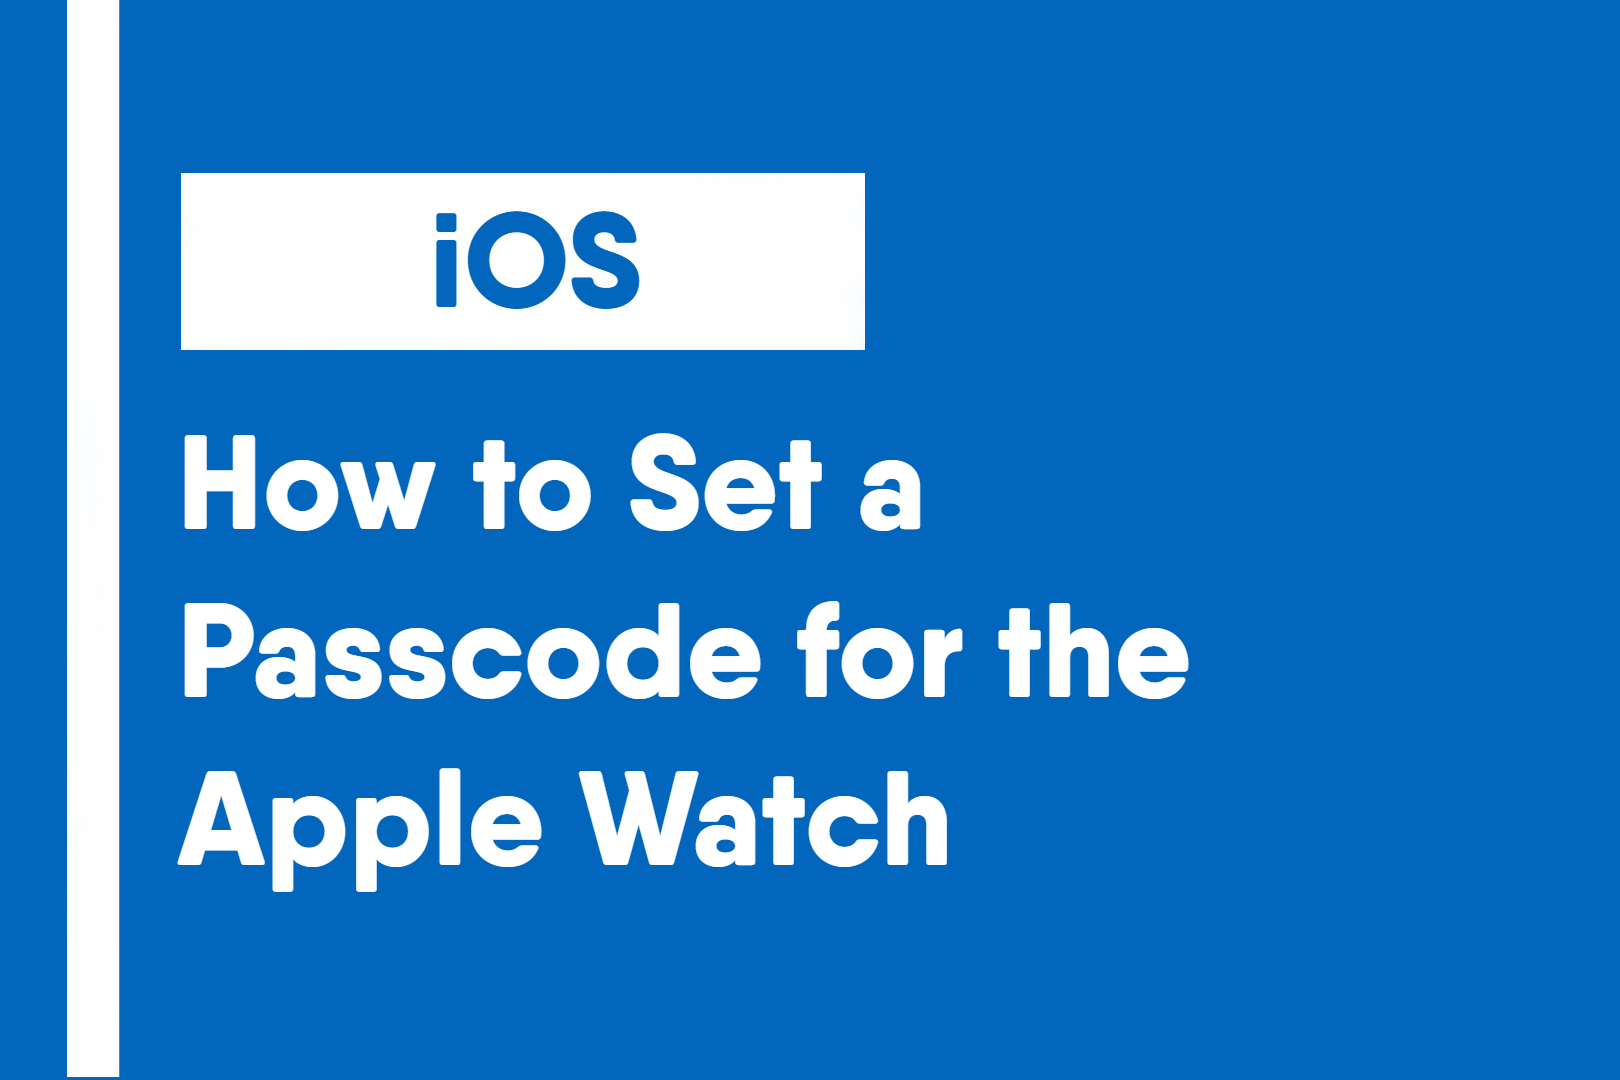 How to Set a Passcode for the Apple Watch